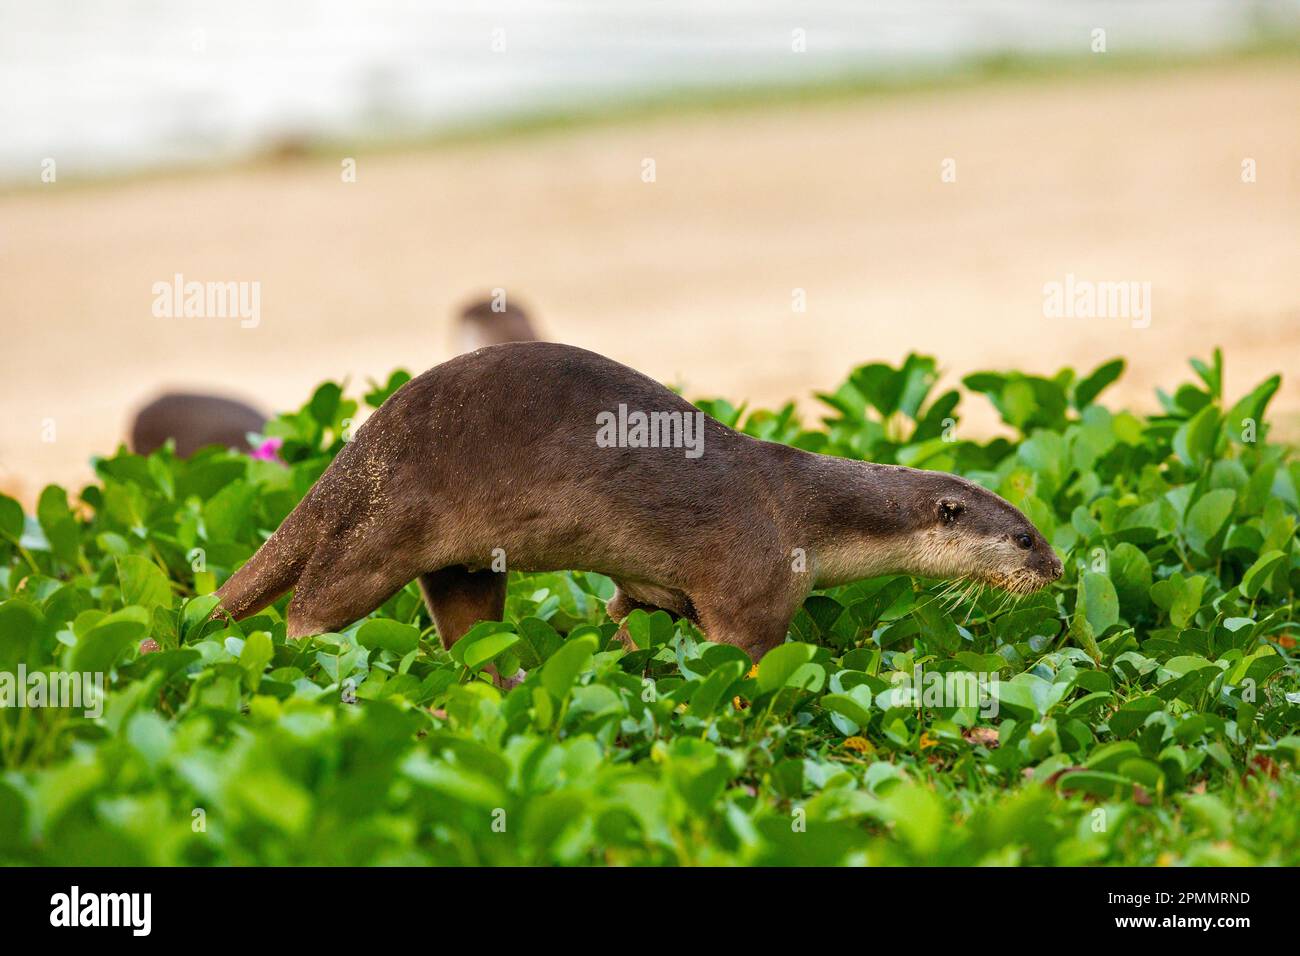 A mature male smooth coated otter leaves the rest of the family resting on the beach to mark his territory, Singapore Stock Photo